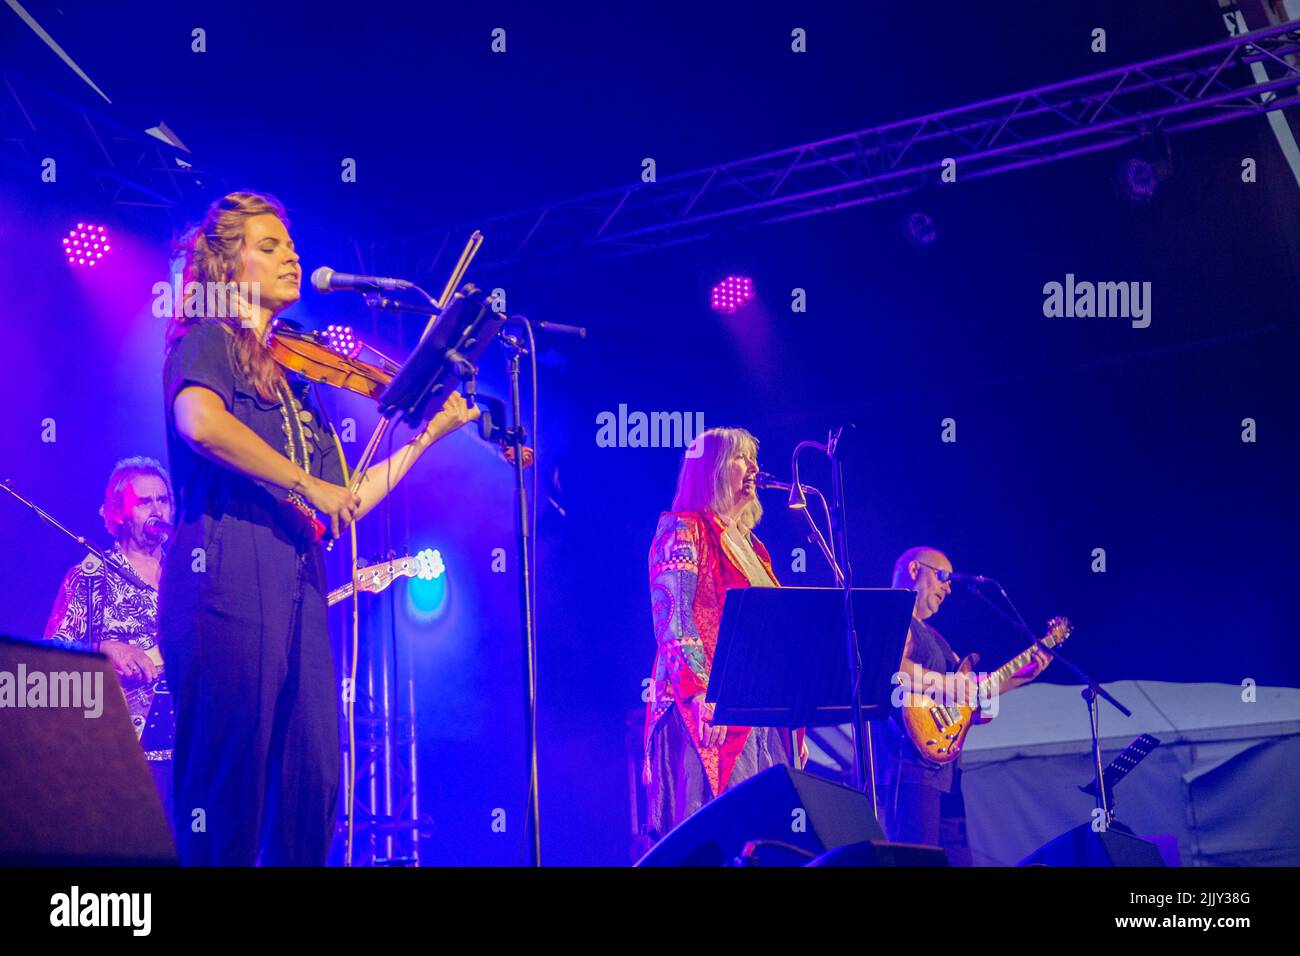 Sidmouth, 28th July 2022 70's Folk/Rock band Steeleye Span kick off the 2022 Sidmouth Folk Festival, back in full sway this year after two years of Pandemic restrictions. Credit: Tony Charnock/Alamy Live News Stock Photo